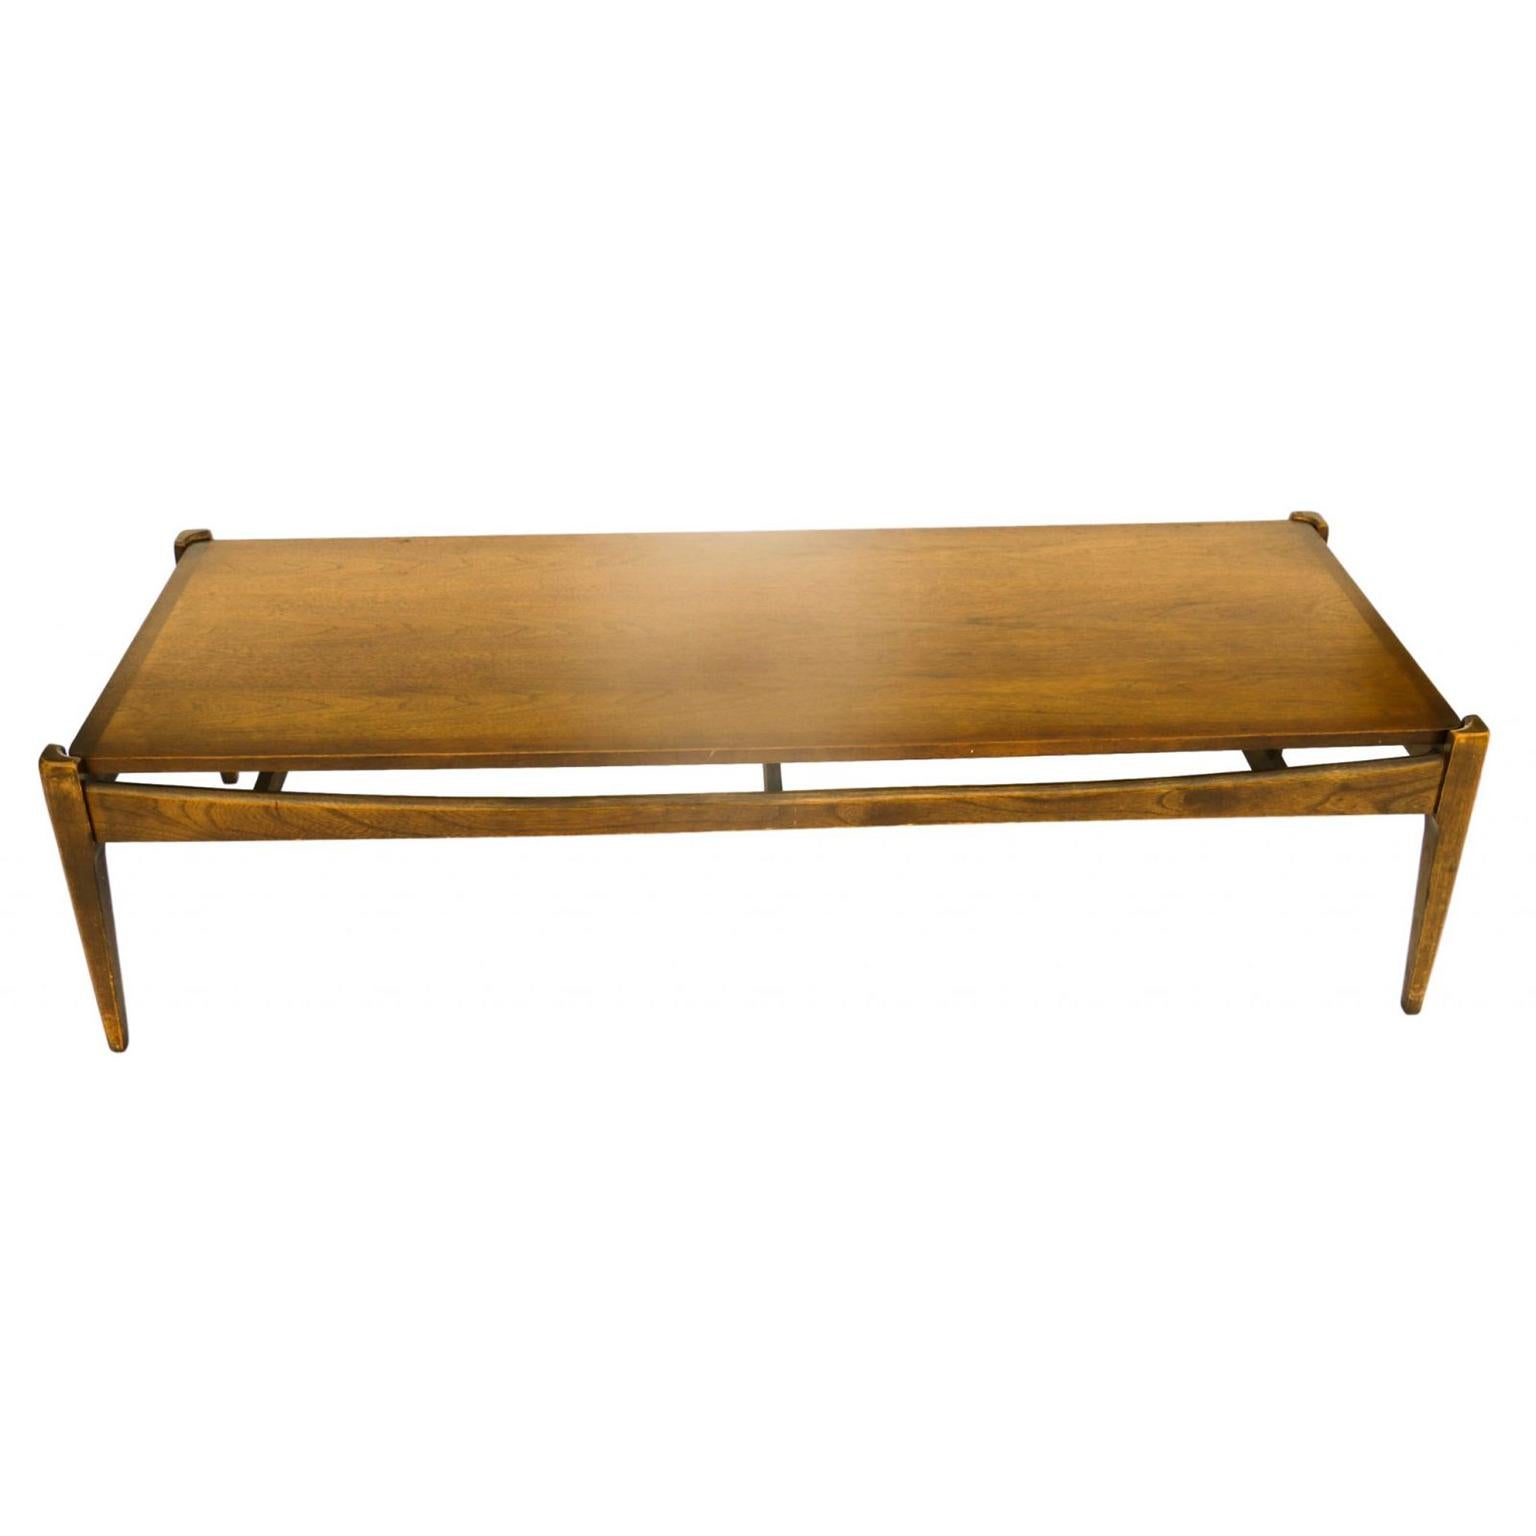 This rare impressive and sleek Mid-Century Modern “Artisan Collection” line coffee table by Bassett was made from the 1960s. It has a great dark walnut color. The lines are clean and elegant. The table is made of solid walnut. Finely tapered pencil